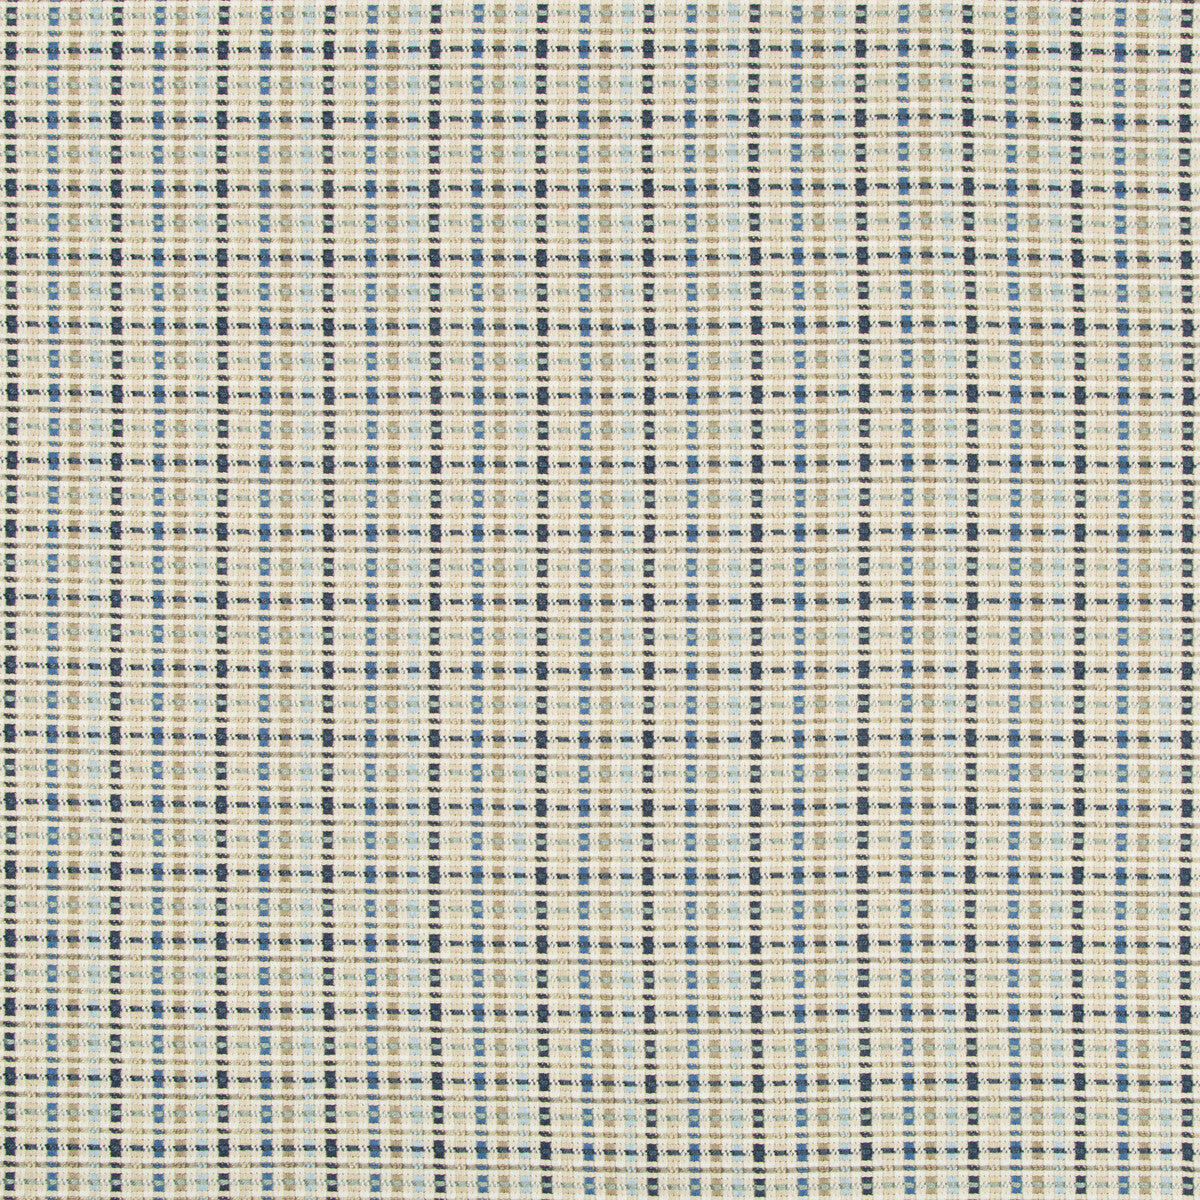 Marollen Texture fabric in blue/tan color - pattern 8019121.516.0 - by Brunschwig &amp; Fils in the Alsace Weaves collection